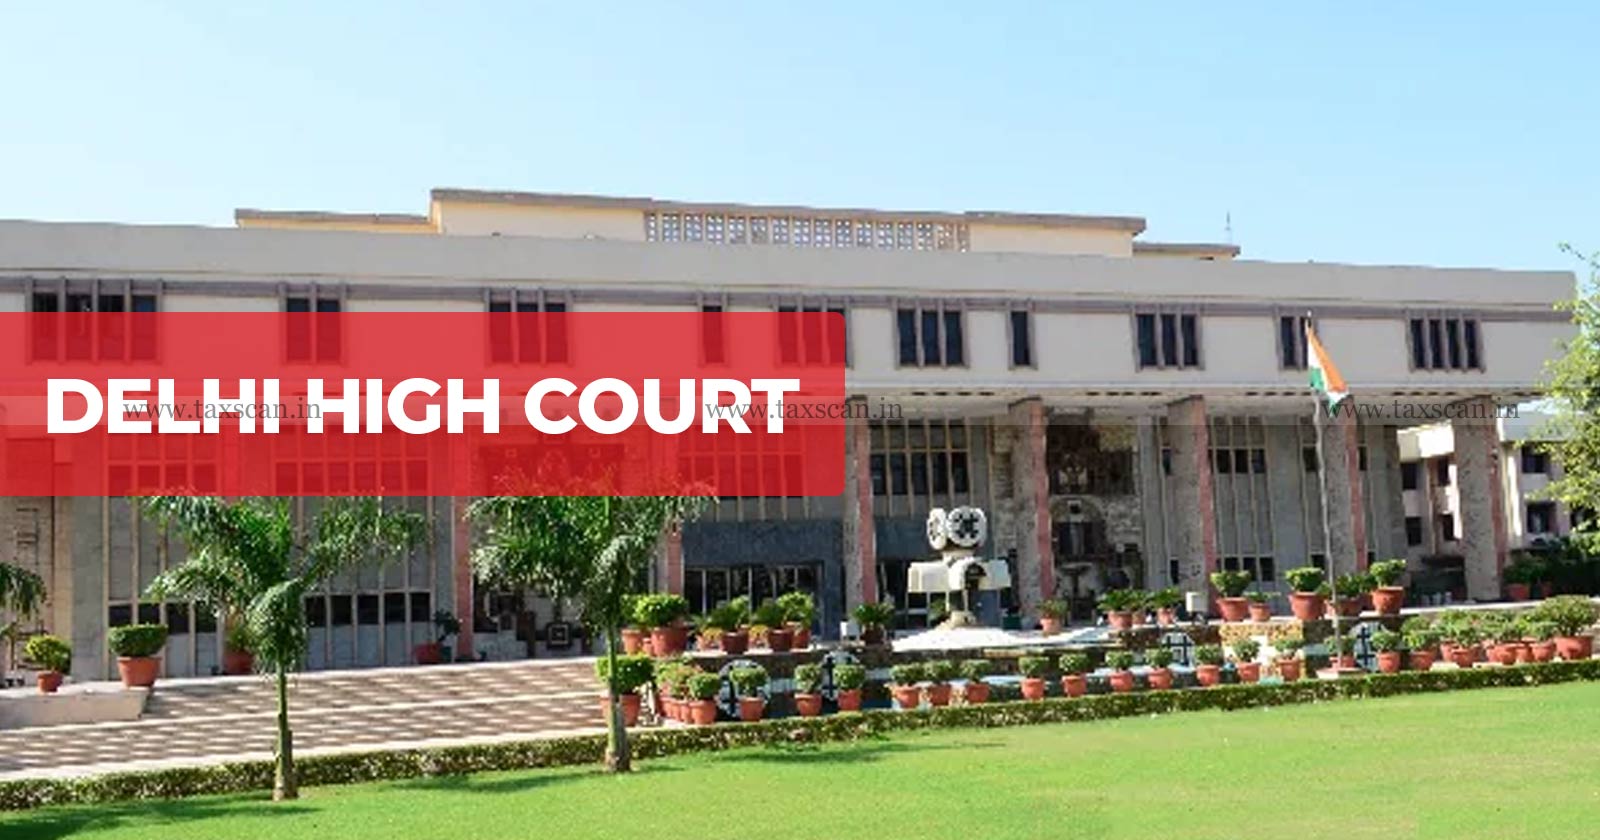 Delhi High Court - deletion of disallowance on expenses - expenses incurred during pre-operative stage - deletion of disallowance - pre-operative stage - upheld - expenses incurred - TAXSCAN